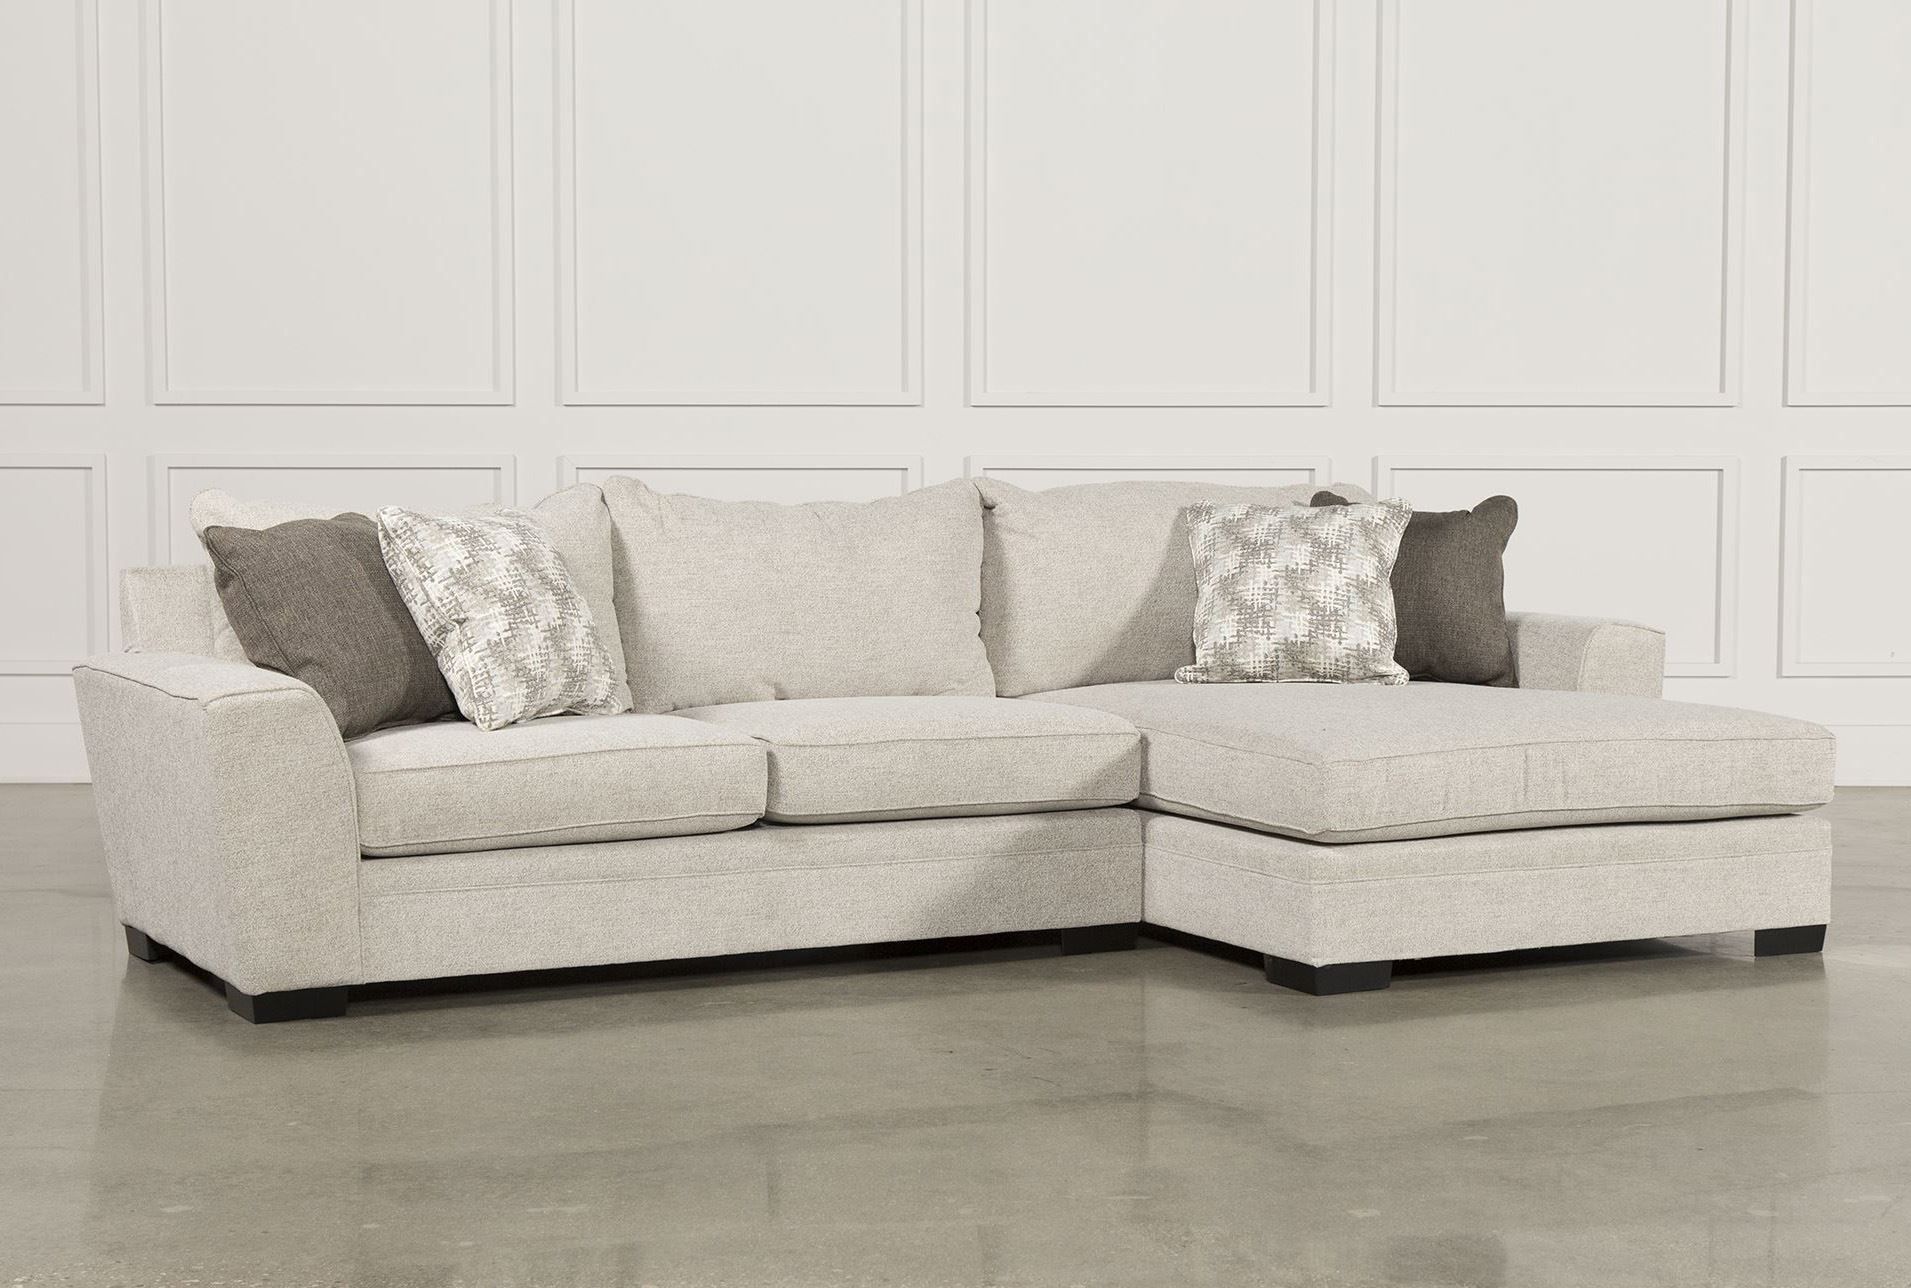 Delano 2 Piece Sectional W/raf Oversized Chaise | New Home Throughout Delano 2 Piece Sectionals With Raf Oversized Chaise (View 3 of 30)